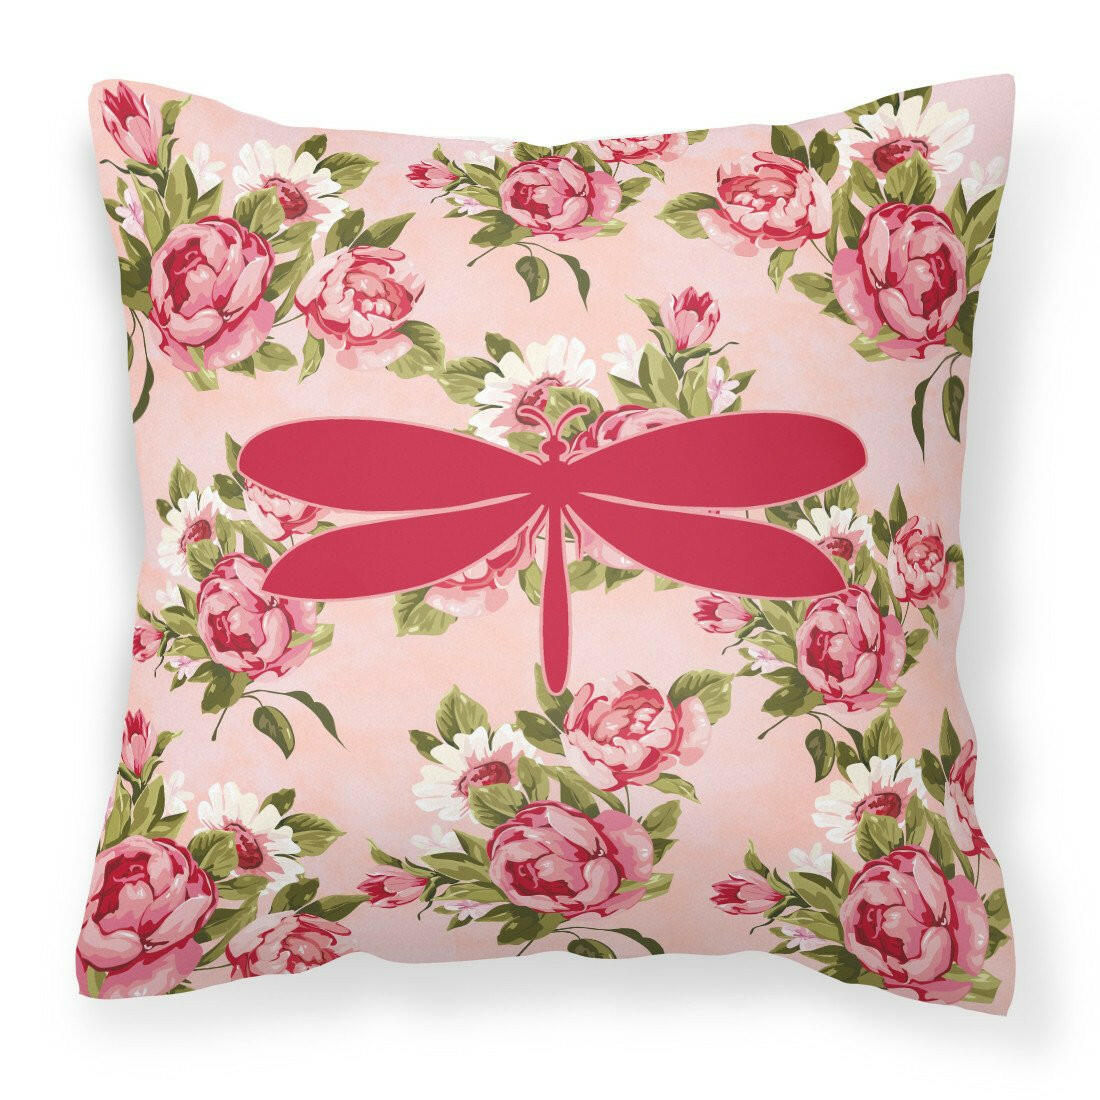 Moth Shabby Chic Pink Roses  Fabric Decorative Pillow BB1061-RS-PK-PW1414 - the-store.com